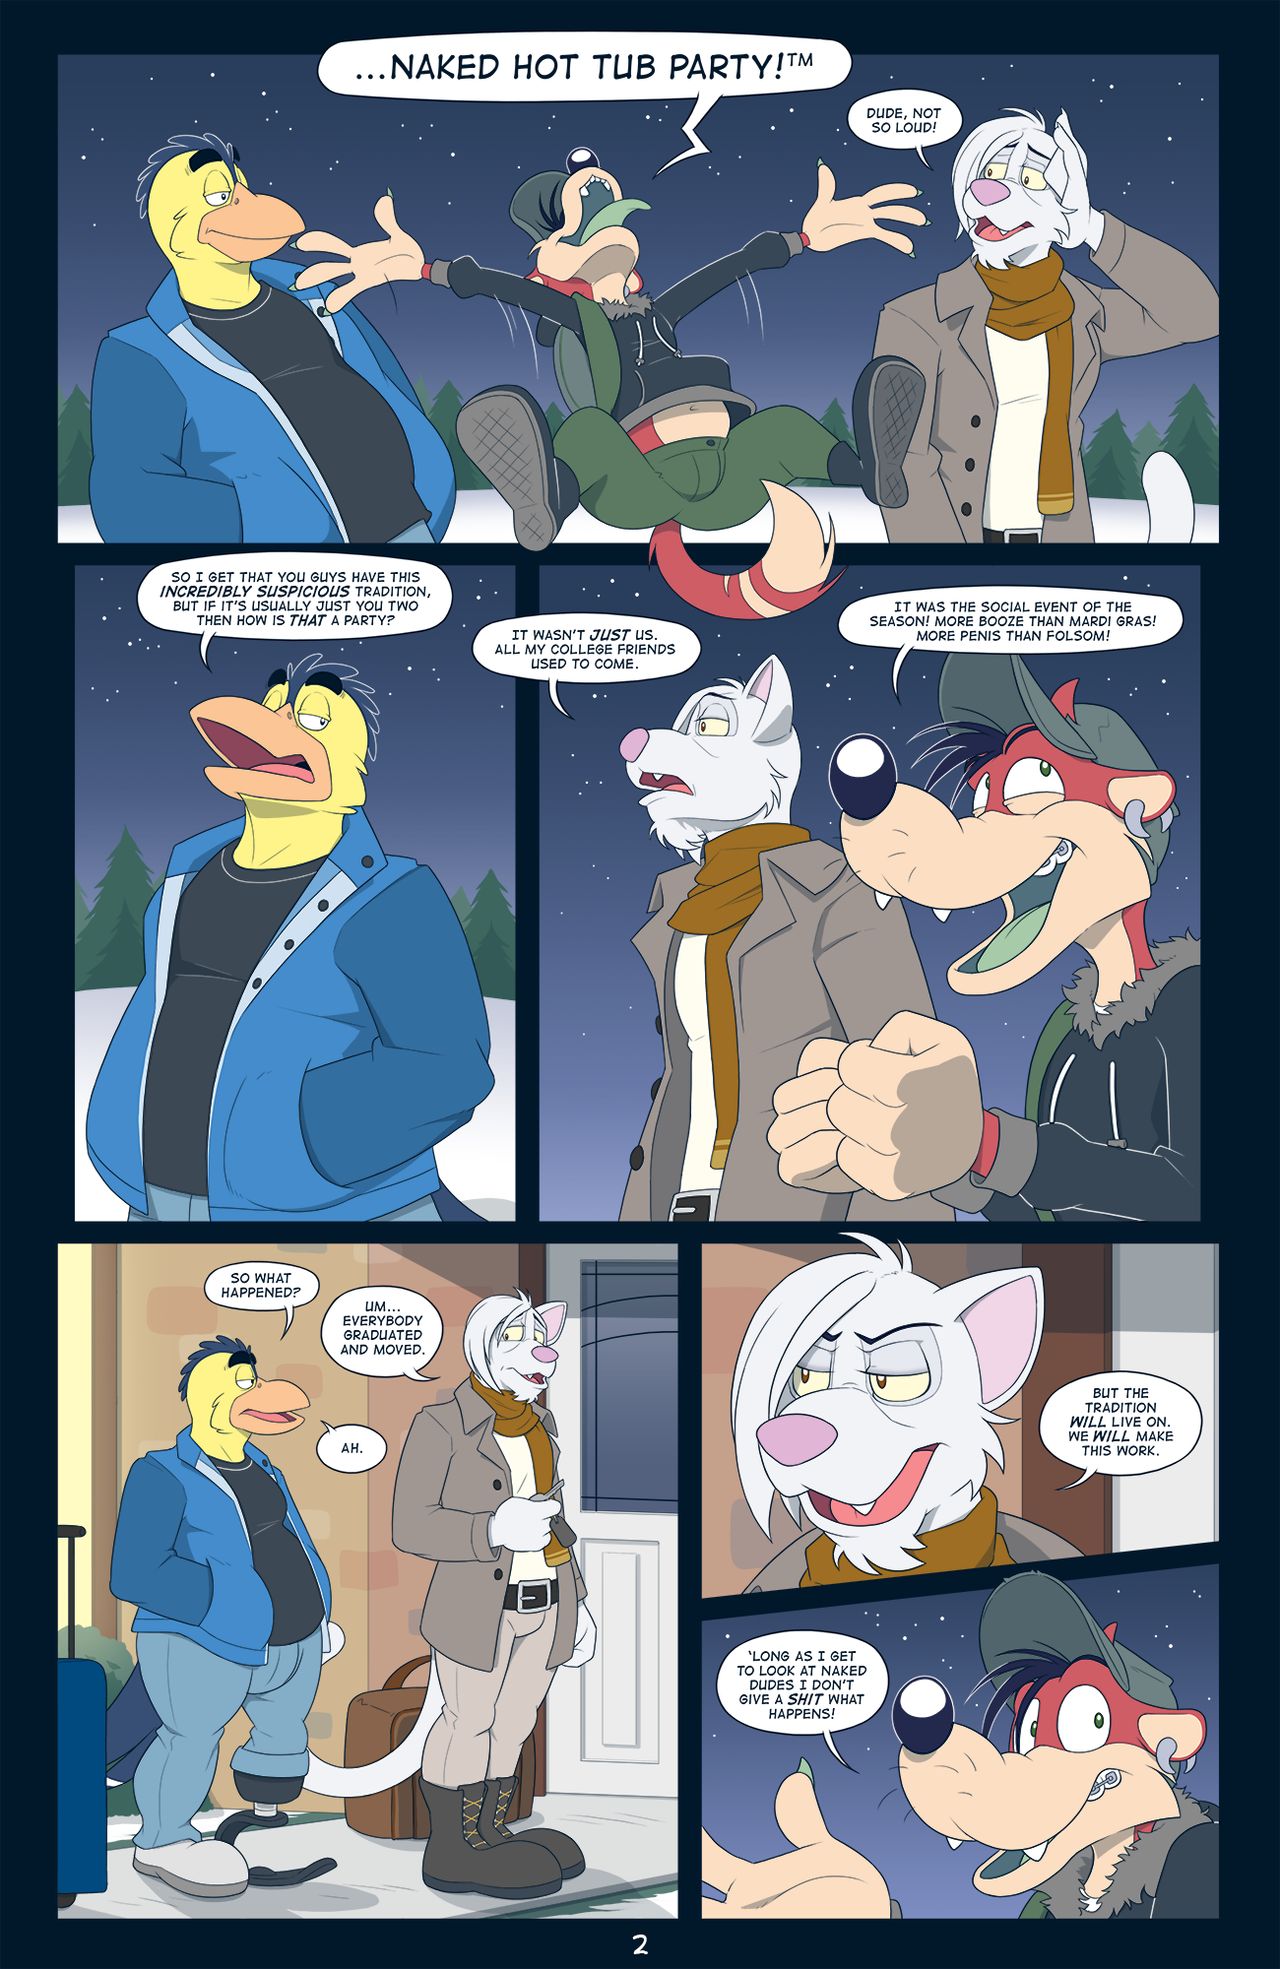 Anti Developmnt] Naked Hot Tub Party - Page 3 | Egg Comics